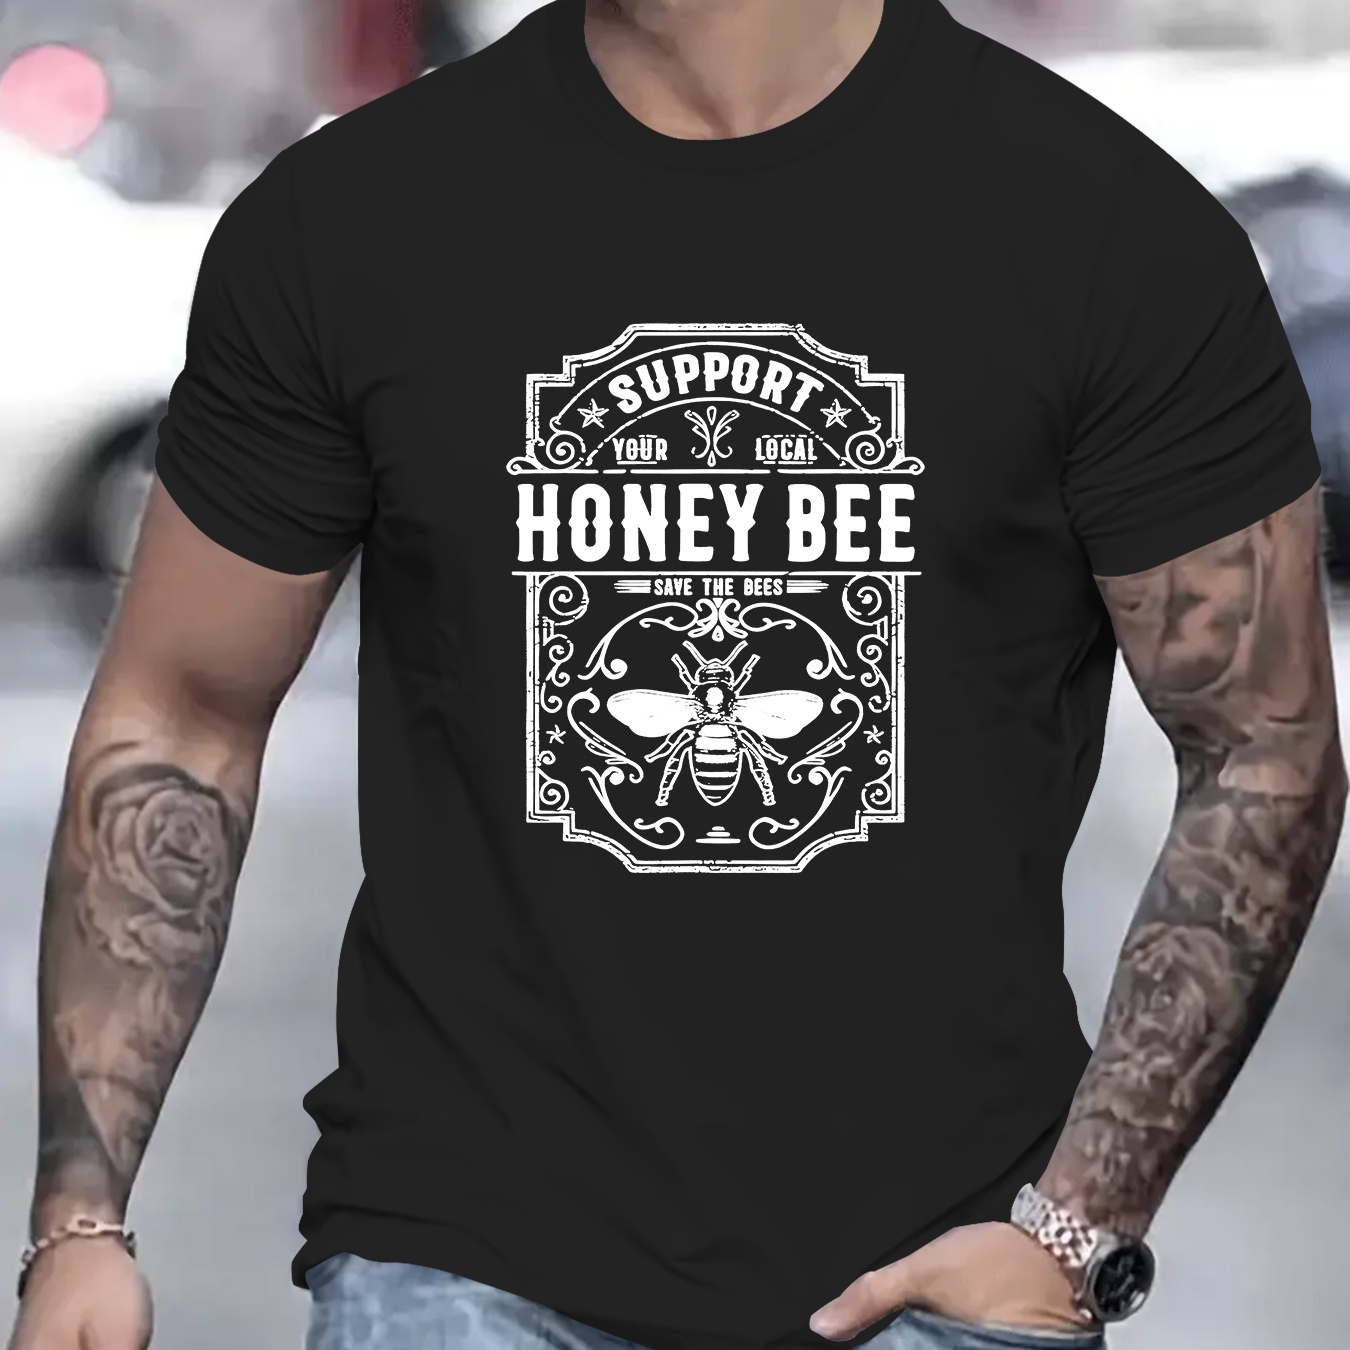 

Men's Casual Short Sleeve, Stylish T-shirt With "honey Bee" Creative Print, Summer Fashion Top, Crew Neck Tee-shirt For Male